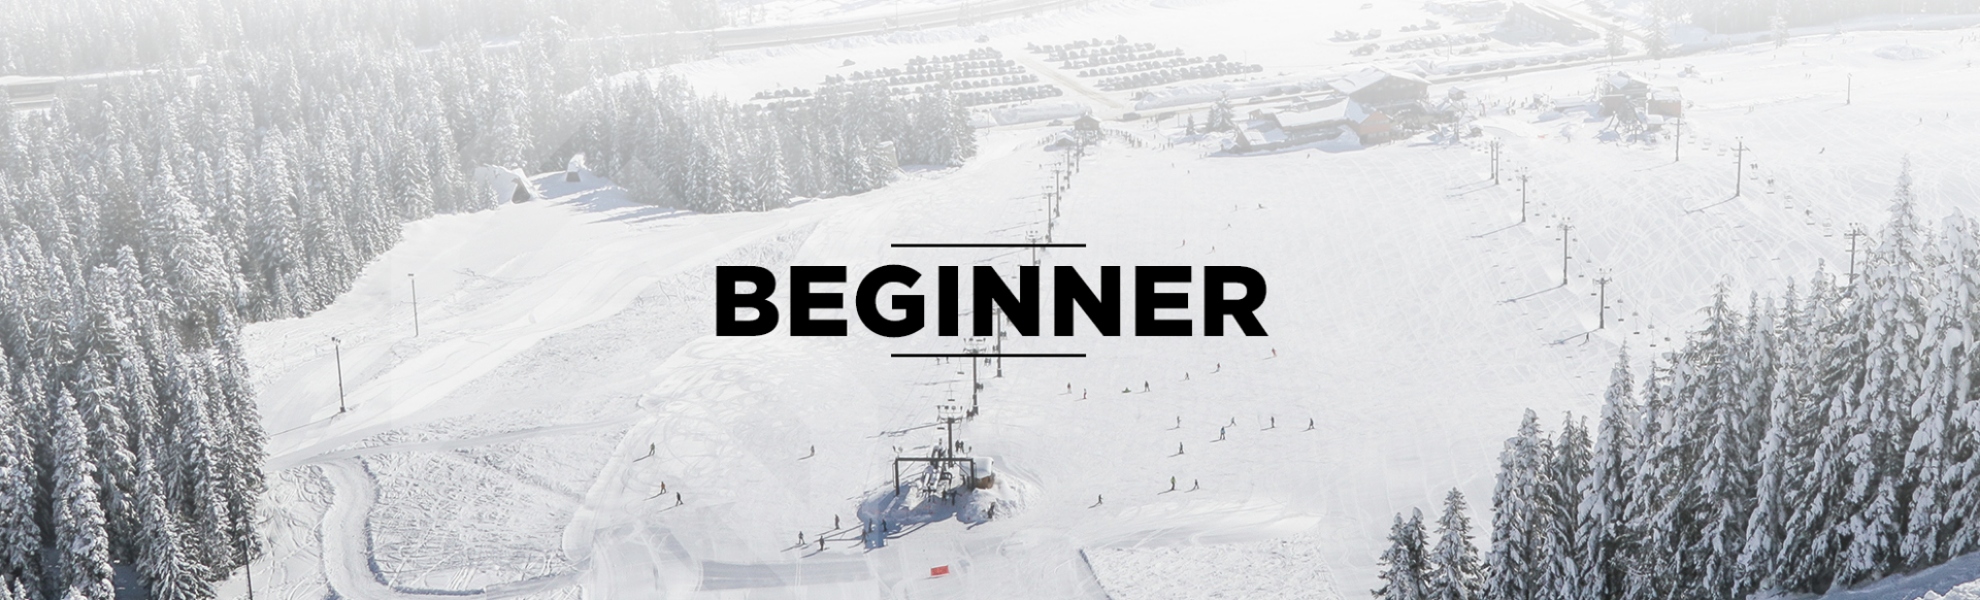 Picture of Beginner Lift Tickets | Day Group